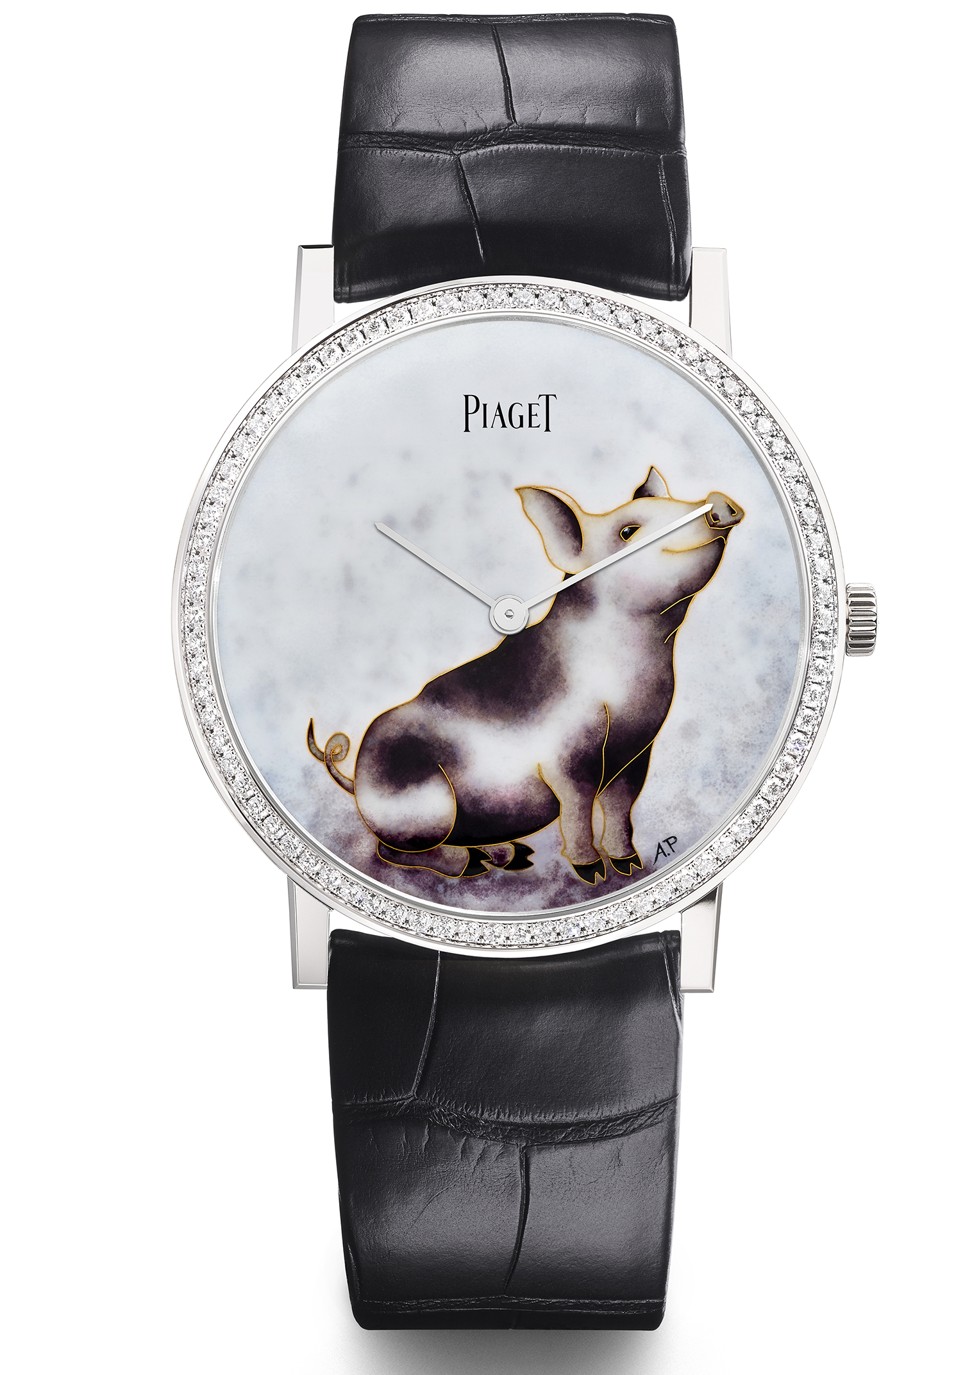 Piaget’s Altiplano Year of the Pig watch features diamonds around the bezel.